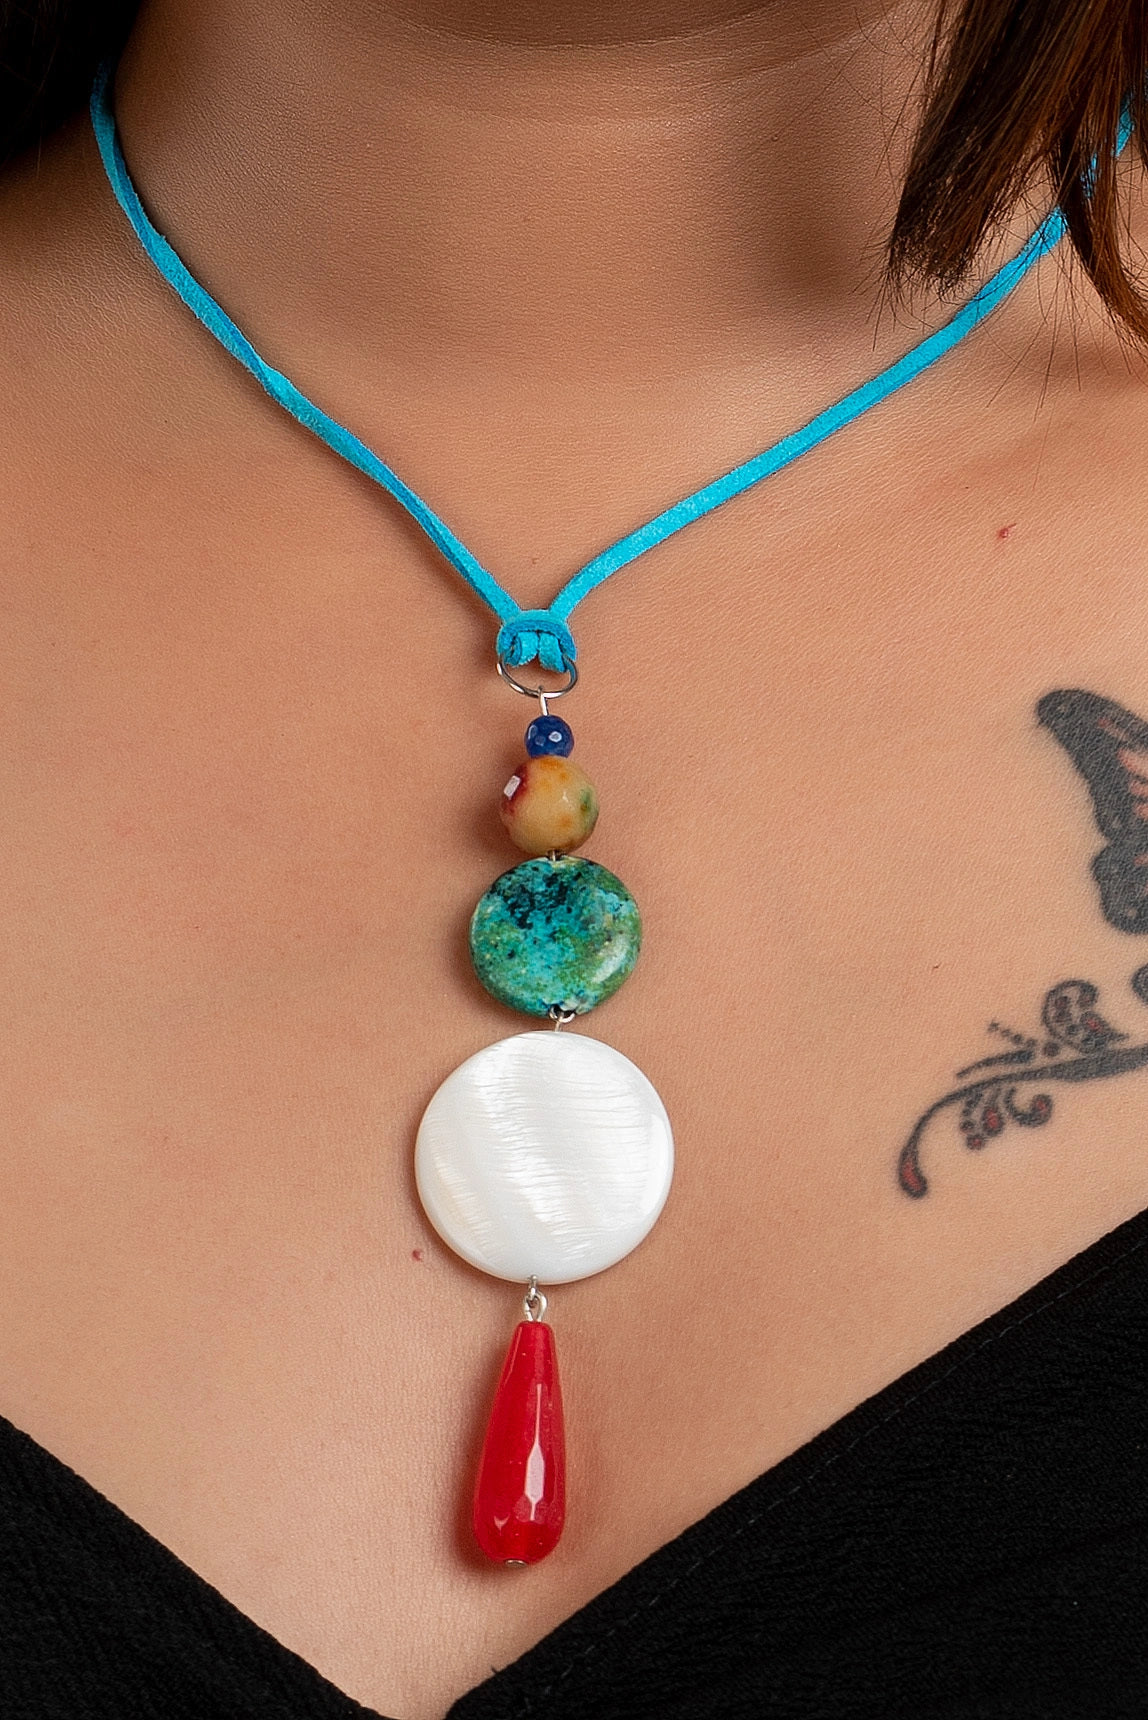 Designer Semi precious stones mother of pearl agate onyx turquoise sleek Neckpiece Strung with Blue Adjustable Suede cord